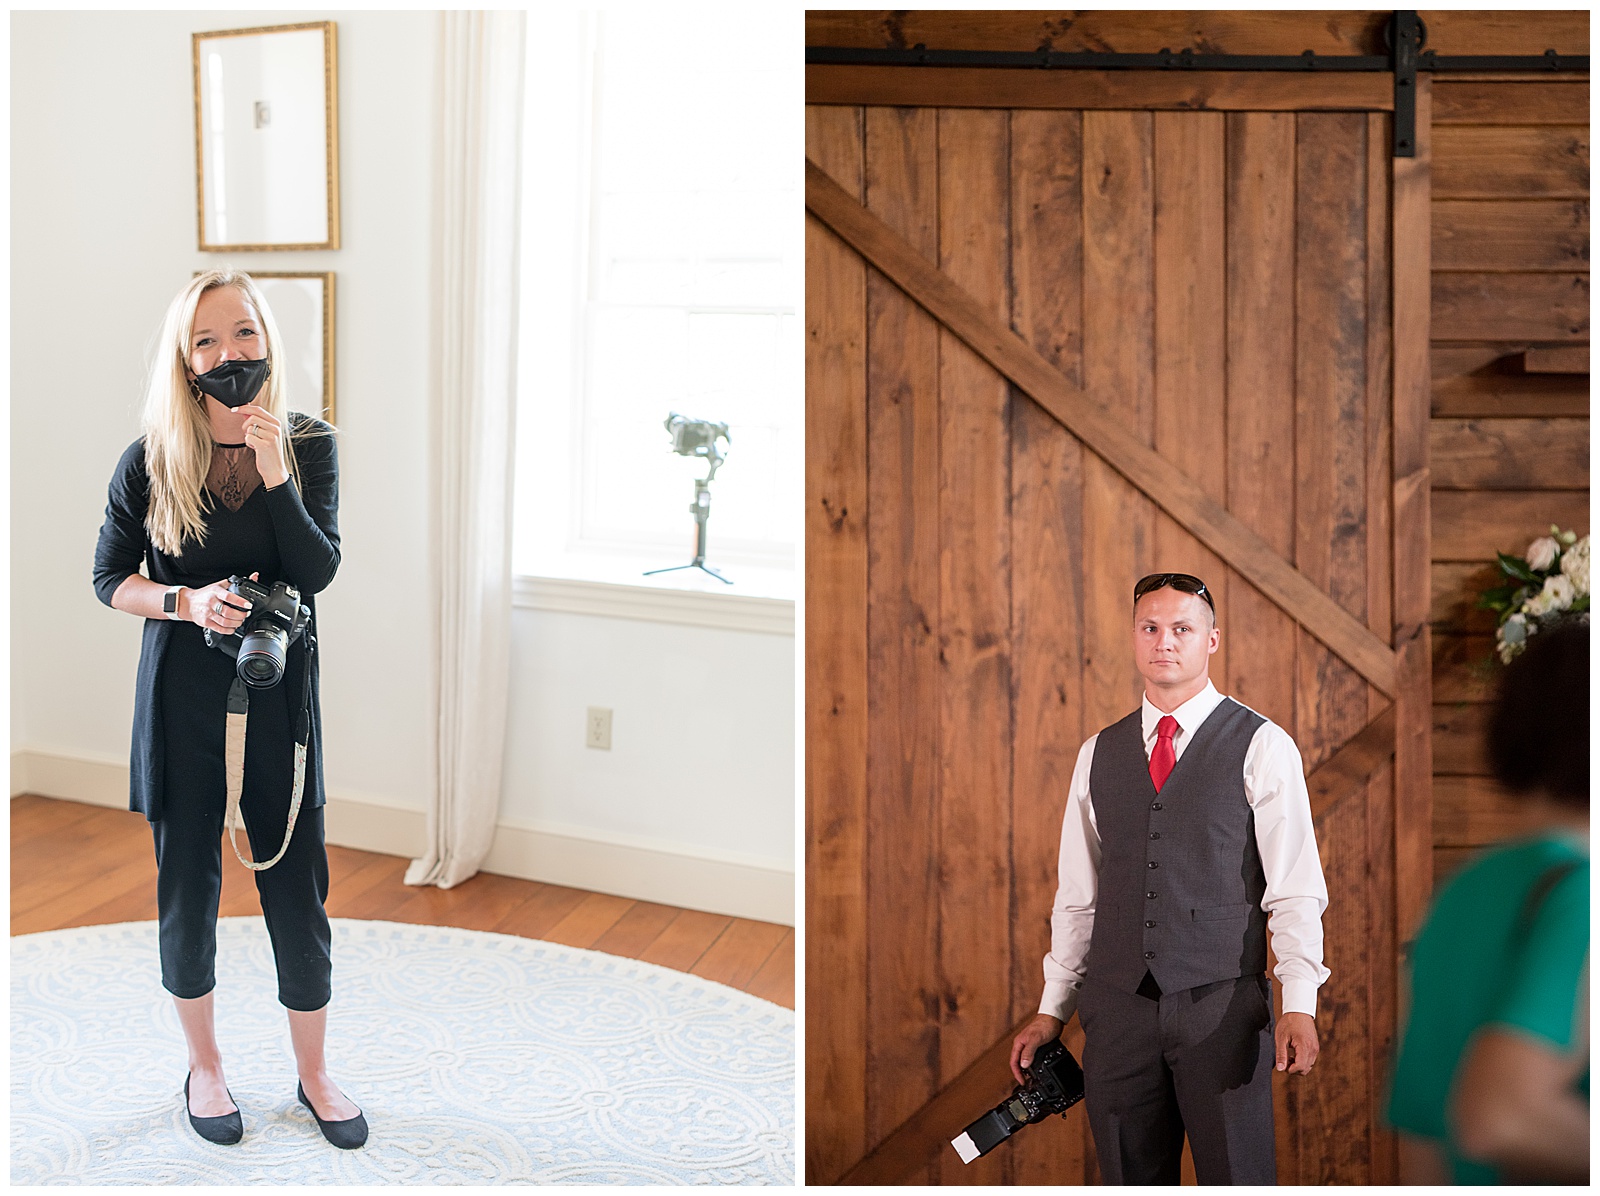 male photographer holding camera and posing for photo by large wooden barn door inside wedding ceremony venue